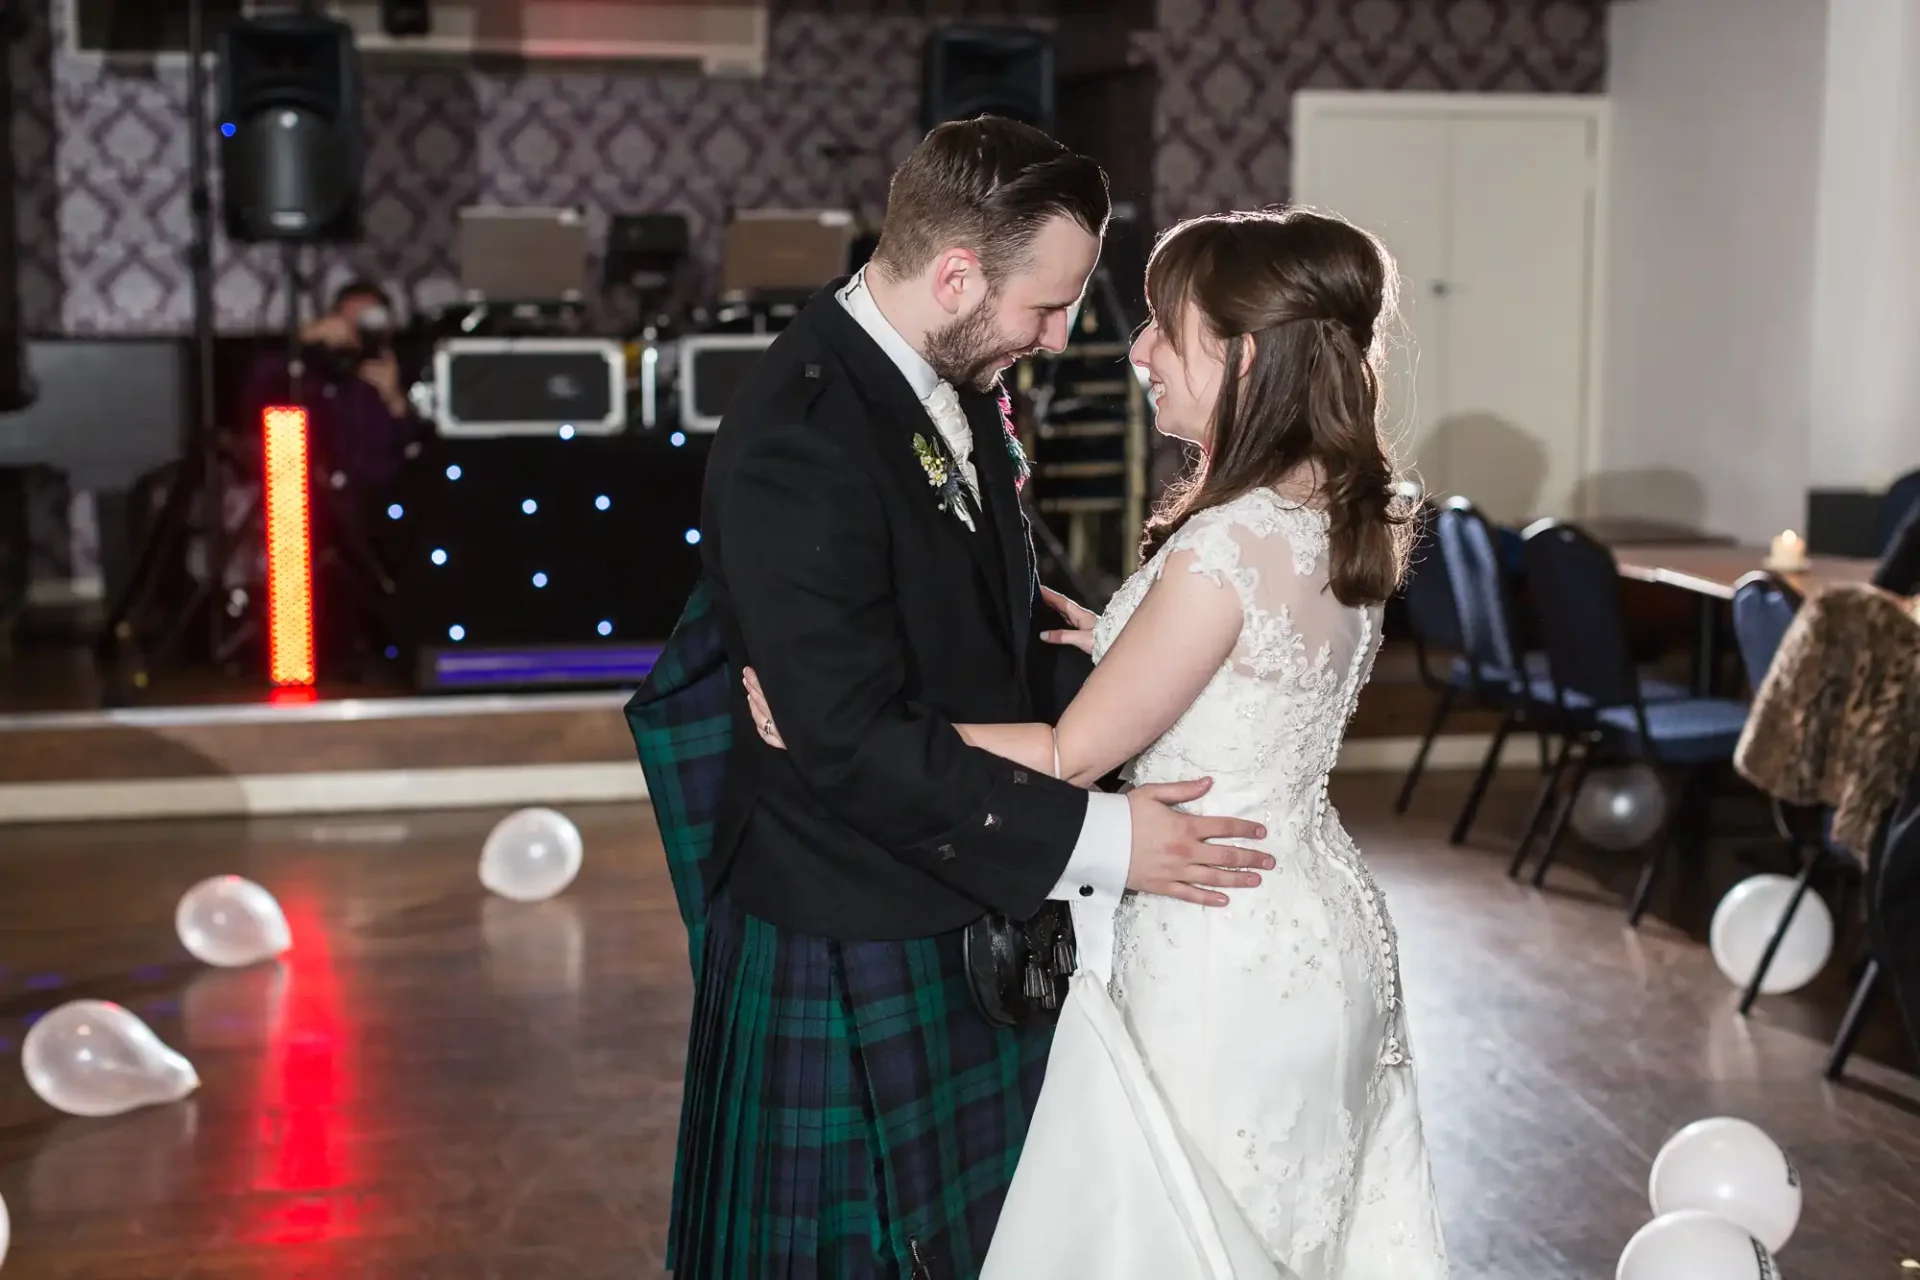 A bride and groom share a romantic dance, the groom in a tartan kilt and the bride in a white dress, in a ballroom with dim lighting and scattered white balloons.